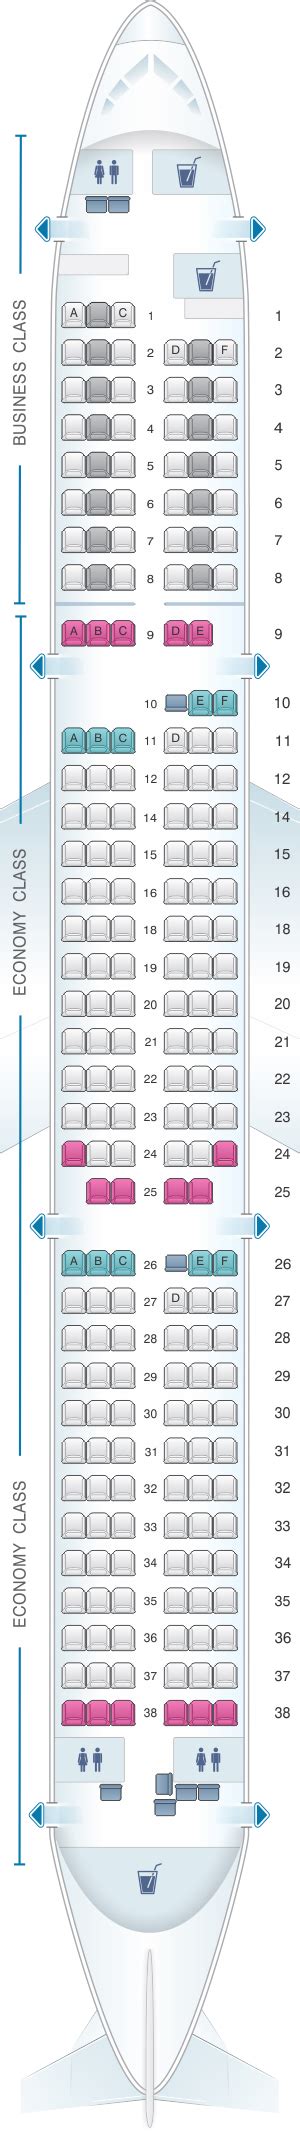 Airbus 321 seats. The American Airlines Airbus A321 features 181 seats in a 3 cabin configuration. Economy has 127 seats in a 3-3 config; Premium economy has 38 seats in a 3-3 config; First class has 16 seats in a 2-2 config; this is pretty standard for these aircraft. 